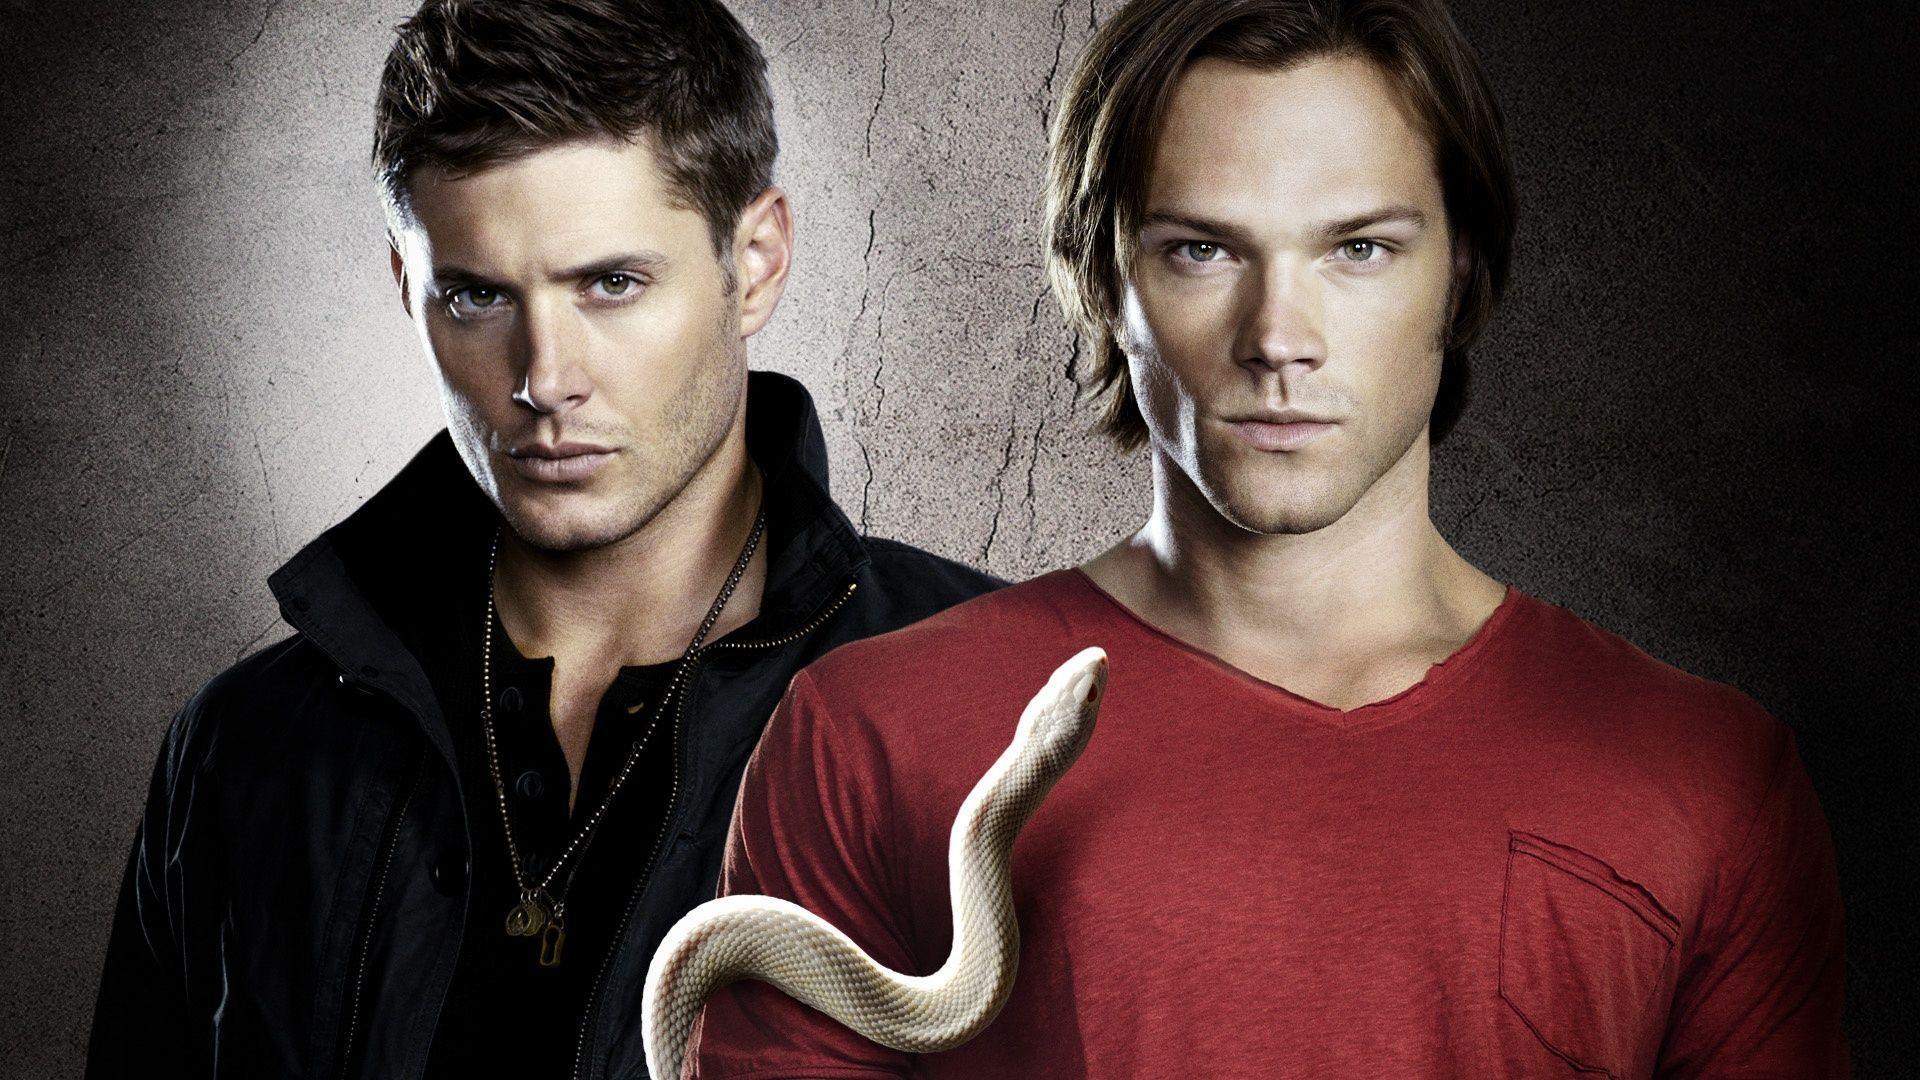 Supernatural: Jared Padalecki & Jensen Ackles On How They Want